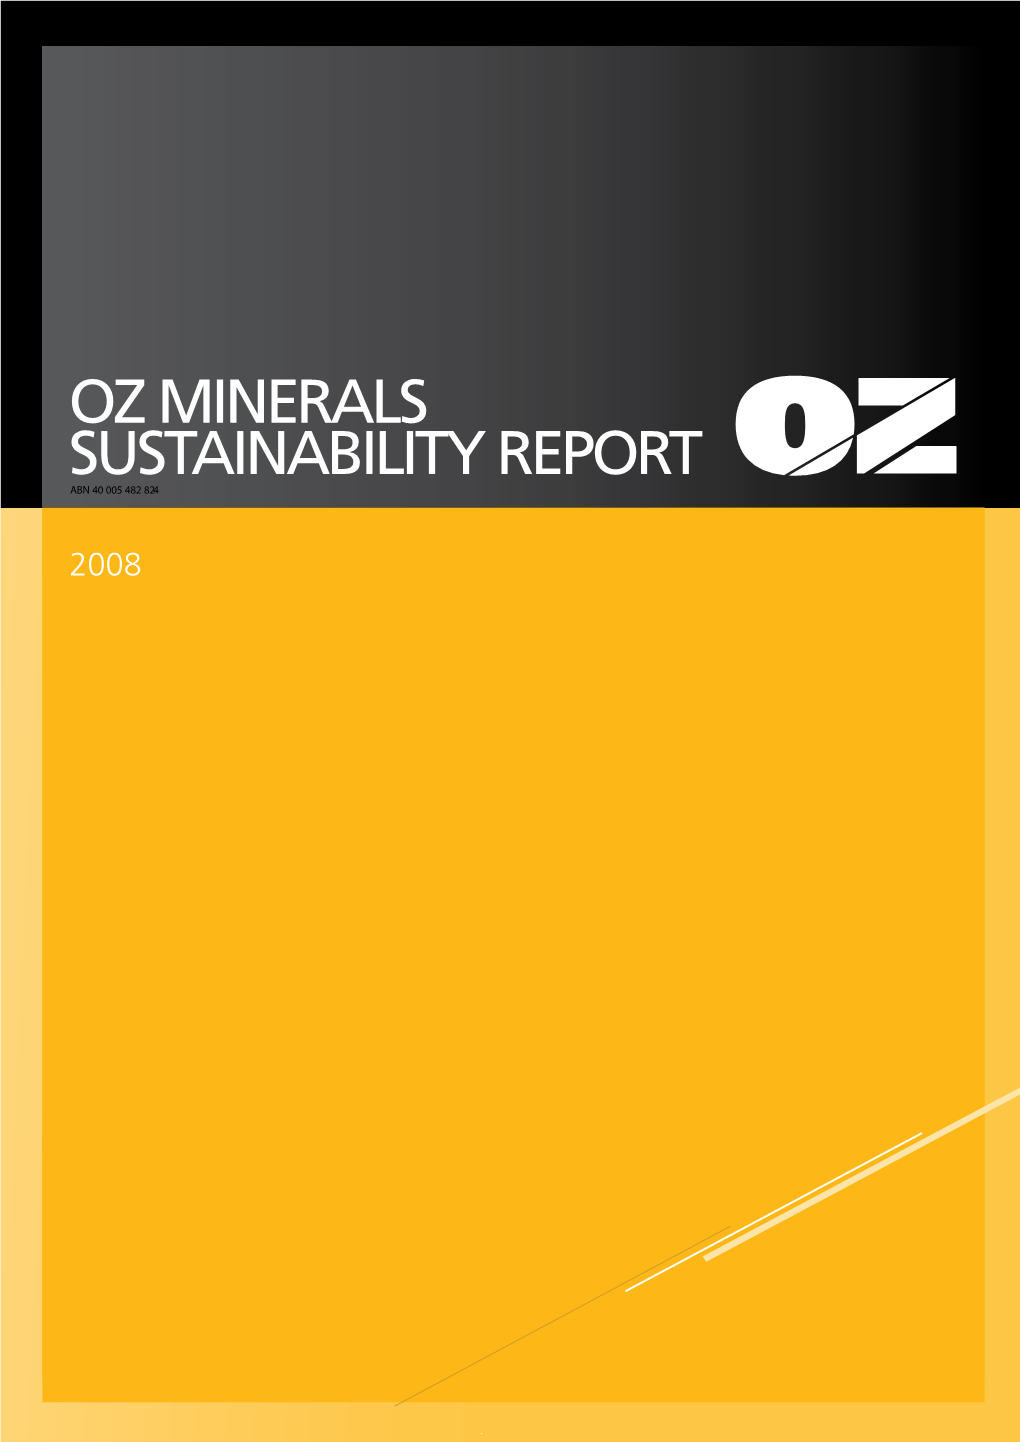 Oz Minerals Sustainability Report Abn 40 005 482 824